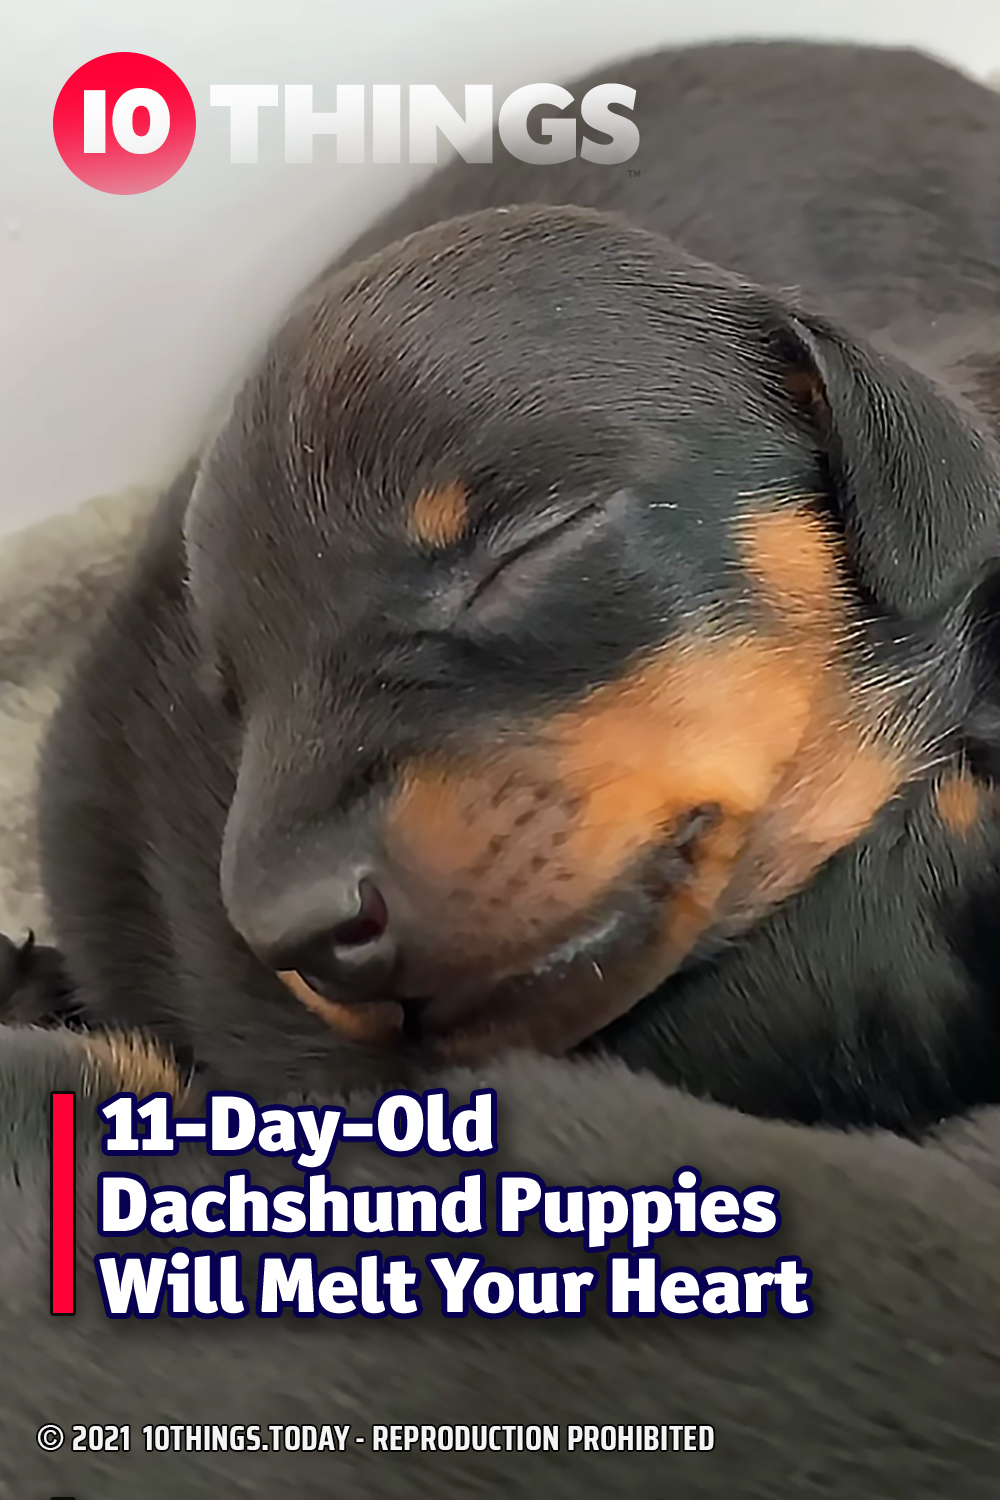 11-Day-Old Dachshund Puppies Will Melt Your Heart